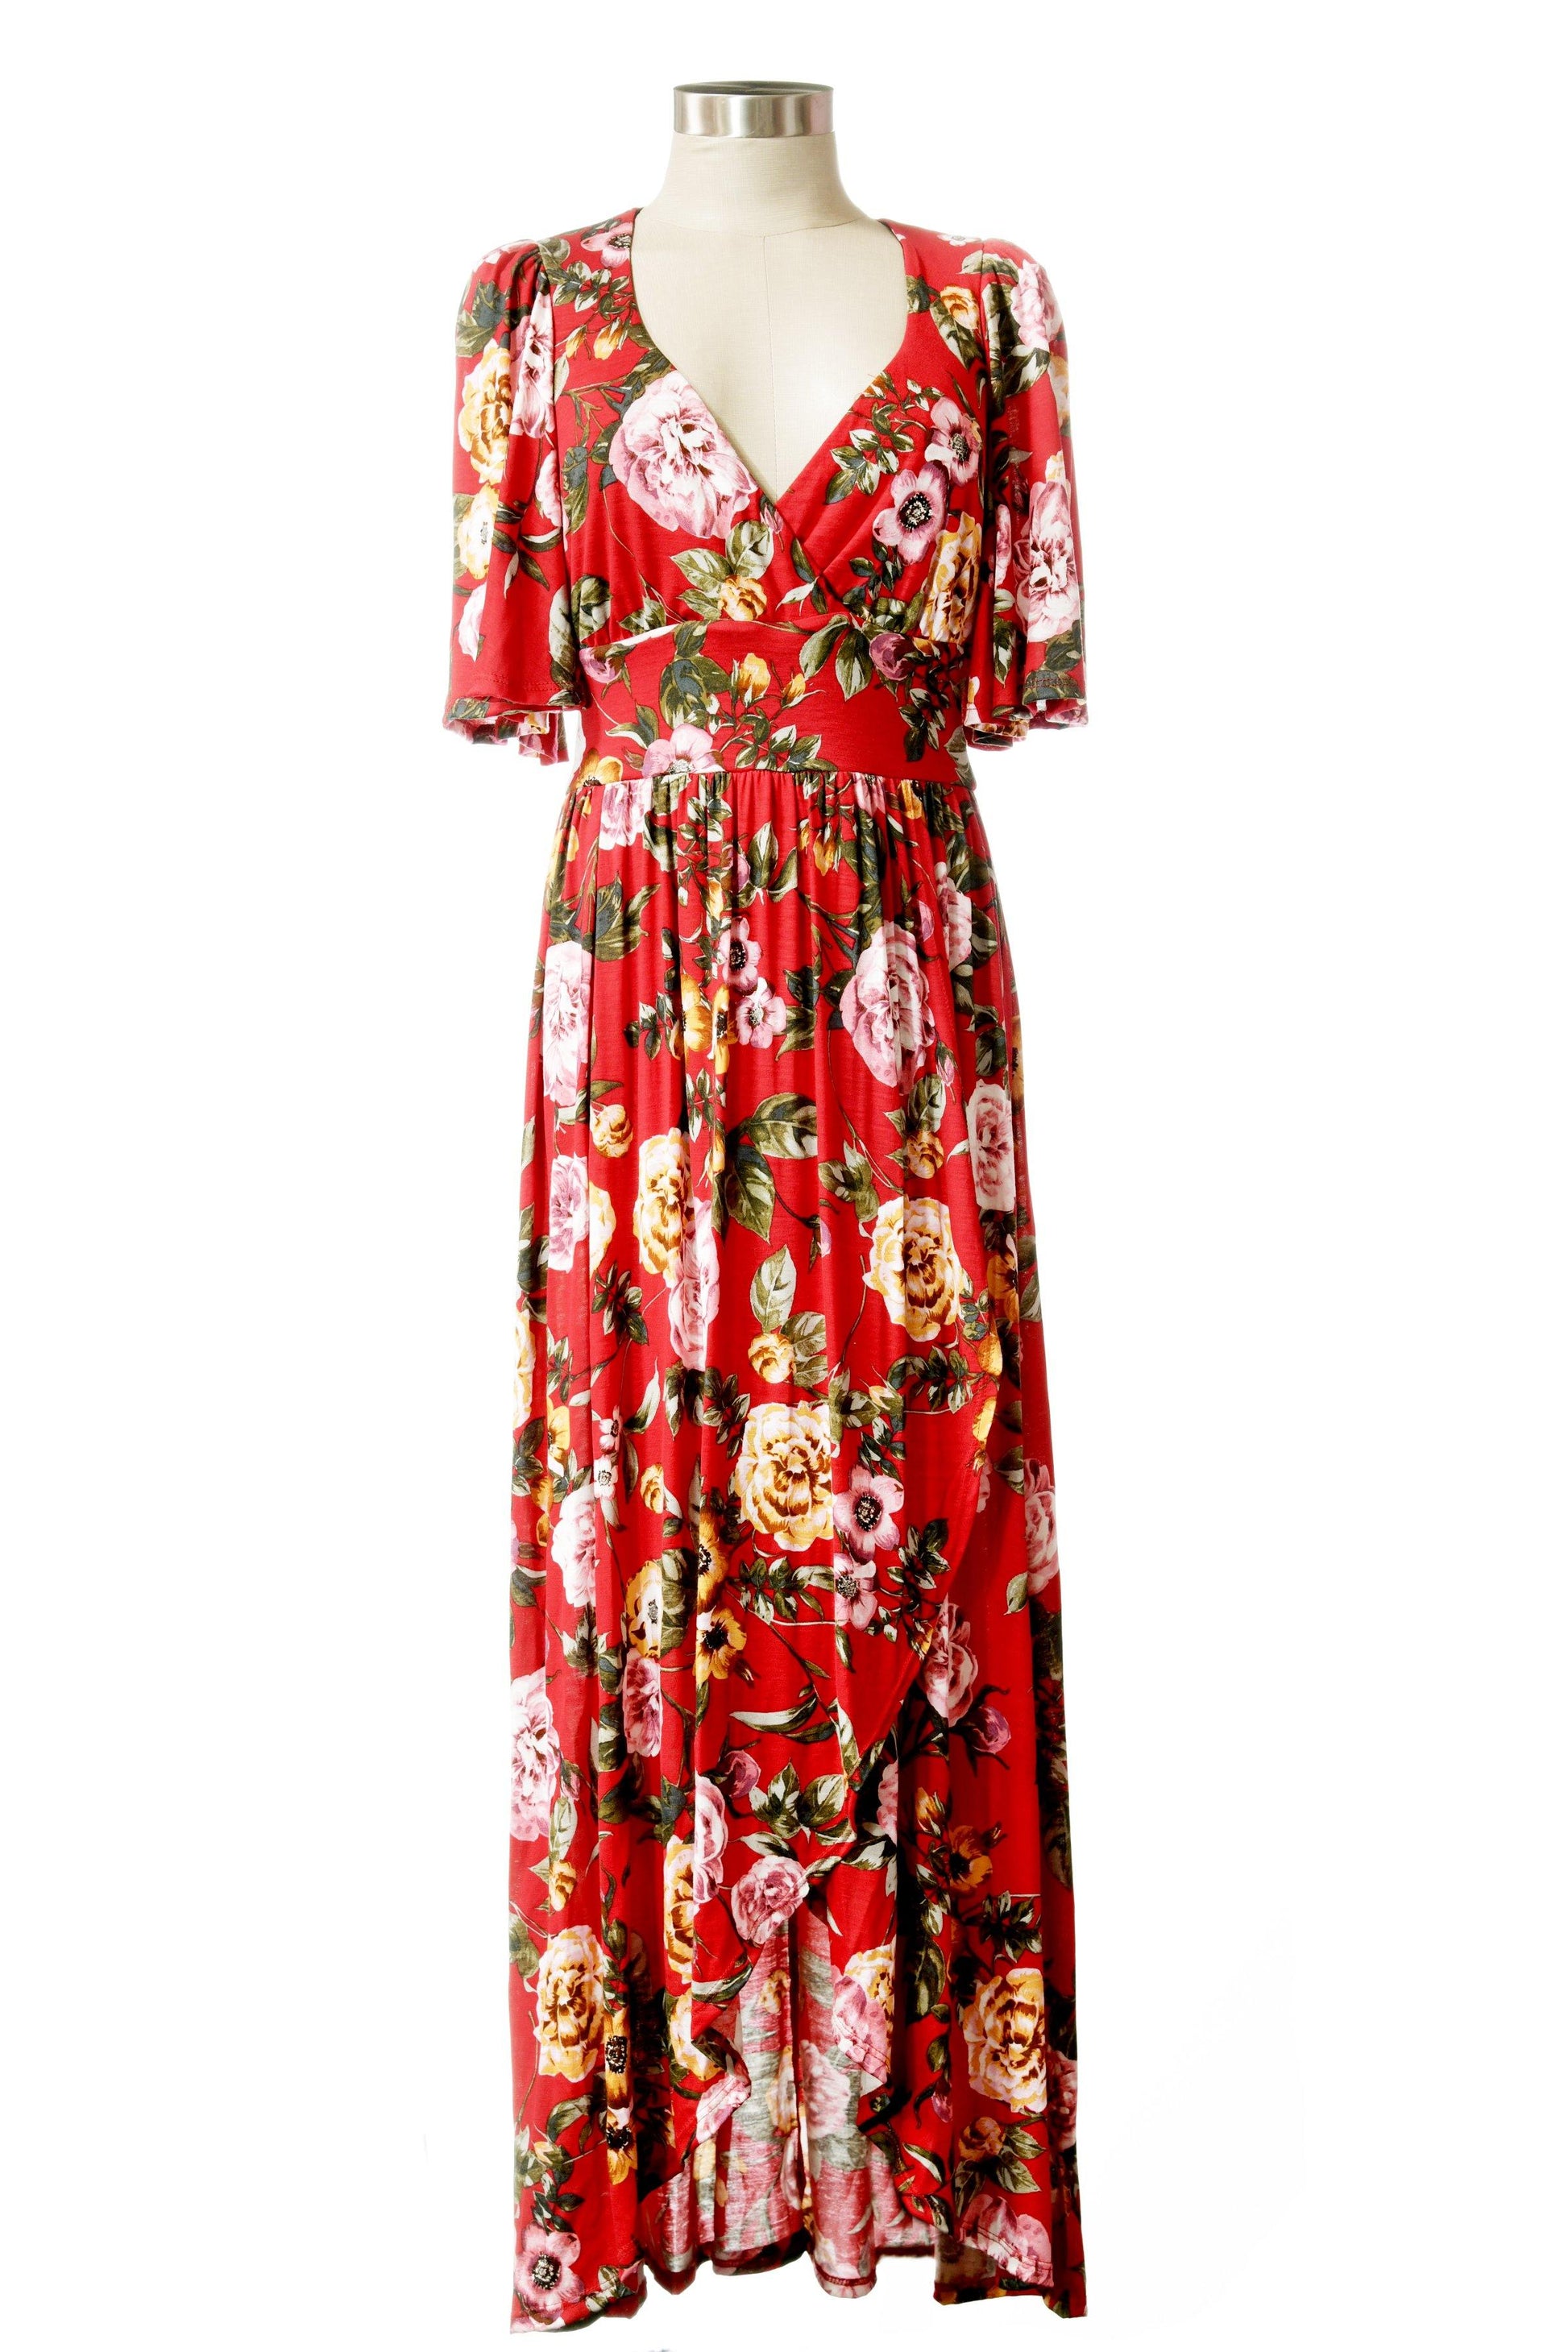 Final Sale - Katy 70s Maxi Dress in Red Floral Cotton Jersey Knit | Pinup Couture - pinupgirlclothing.com